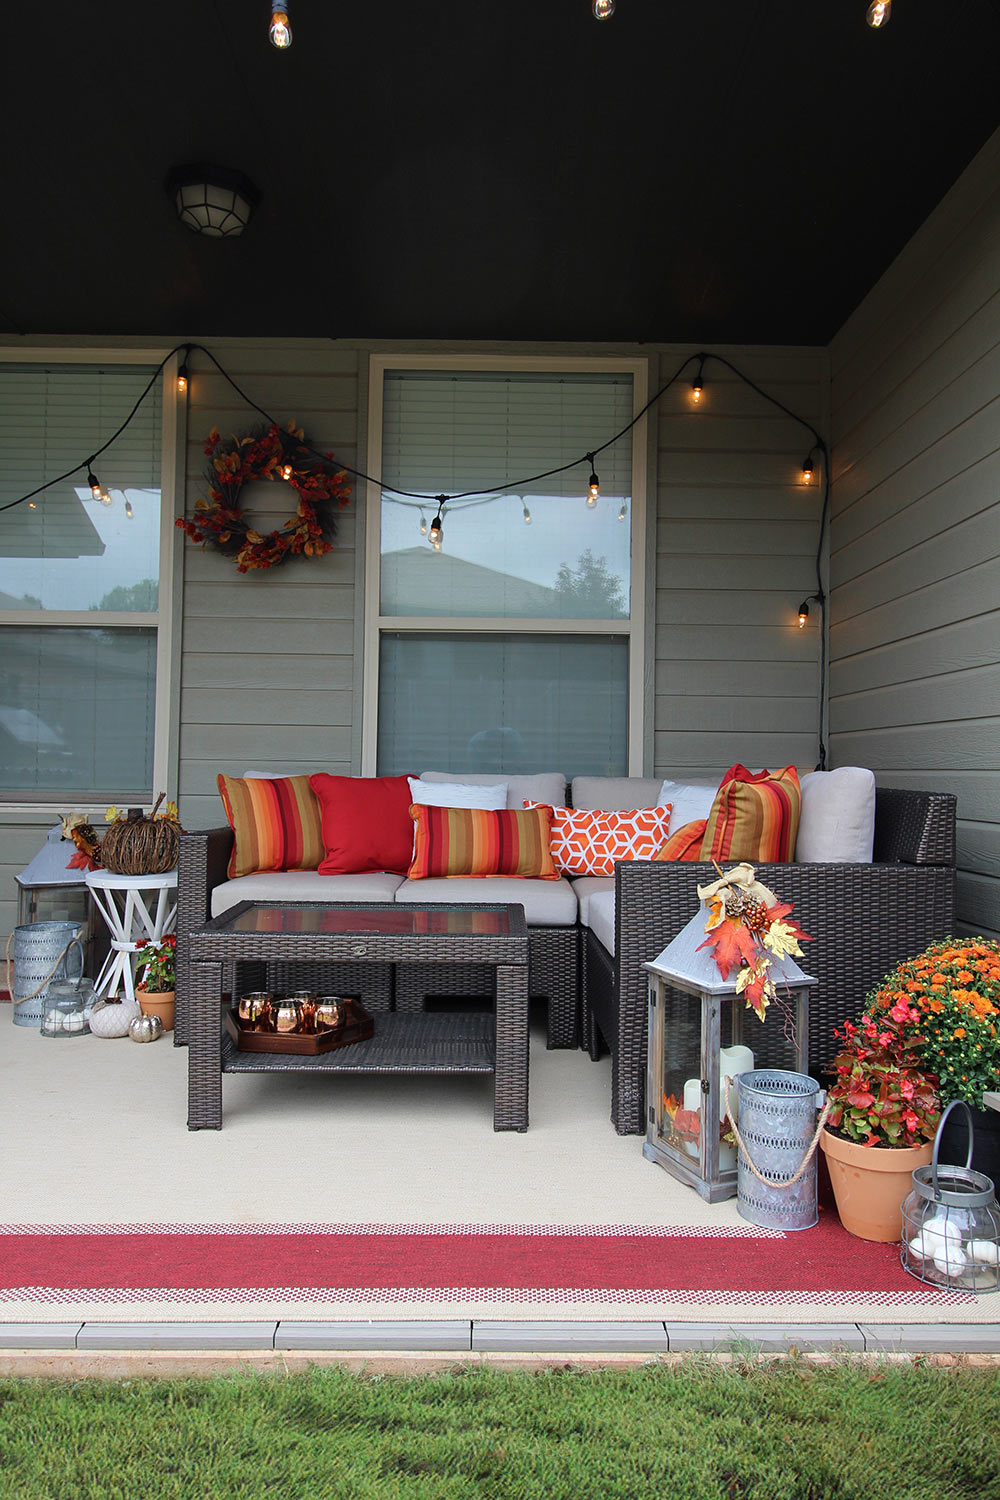 A set of string lights hangs over an outdoor patio sectional.